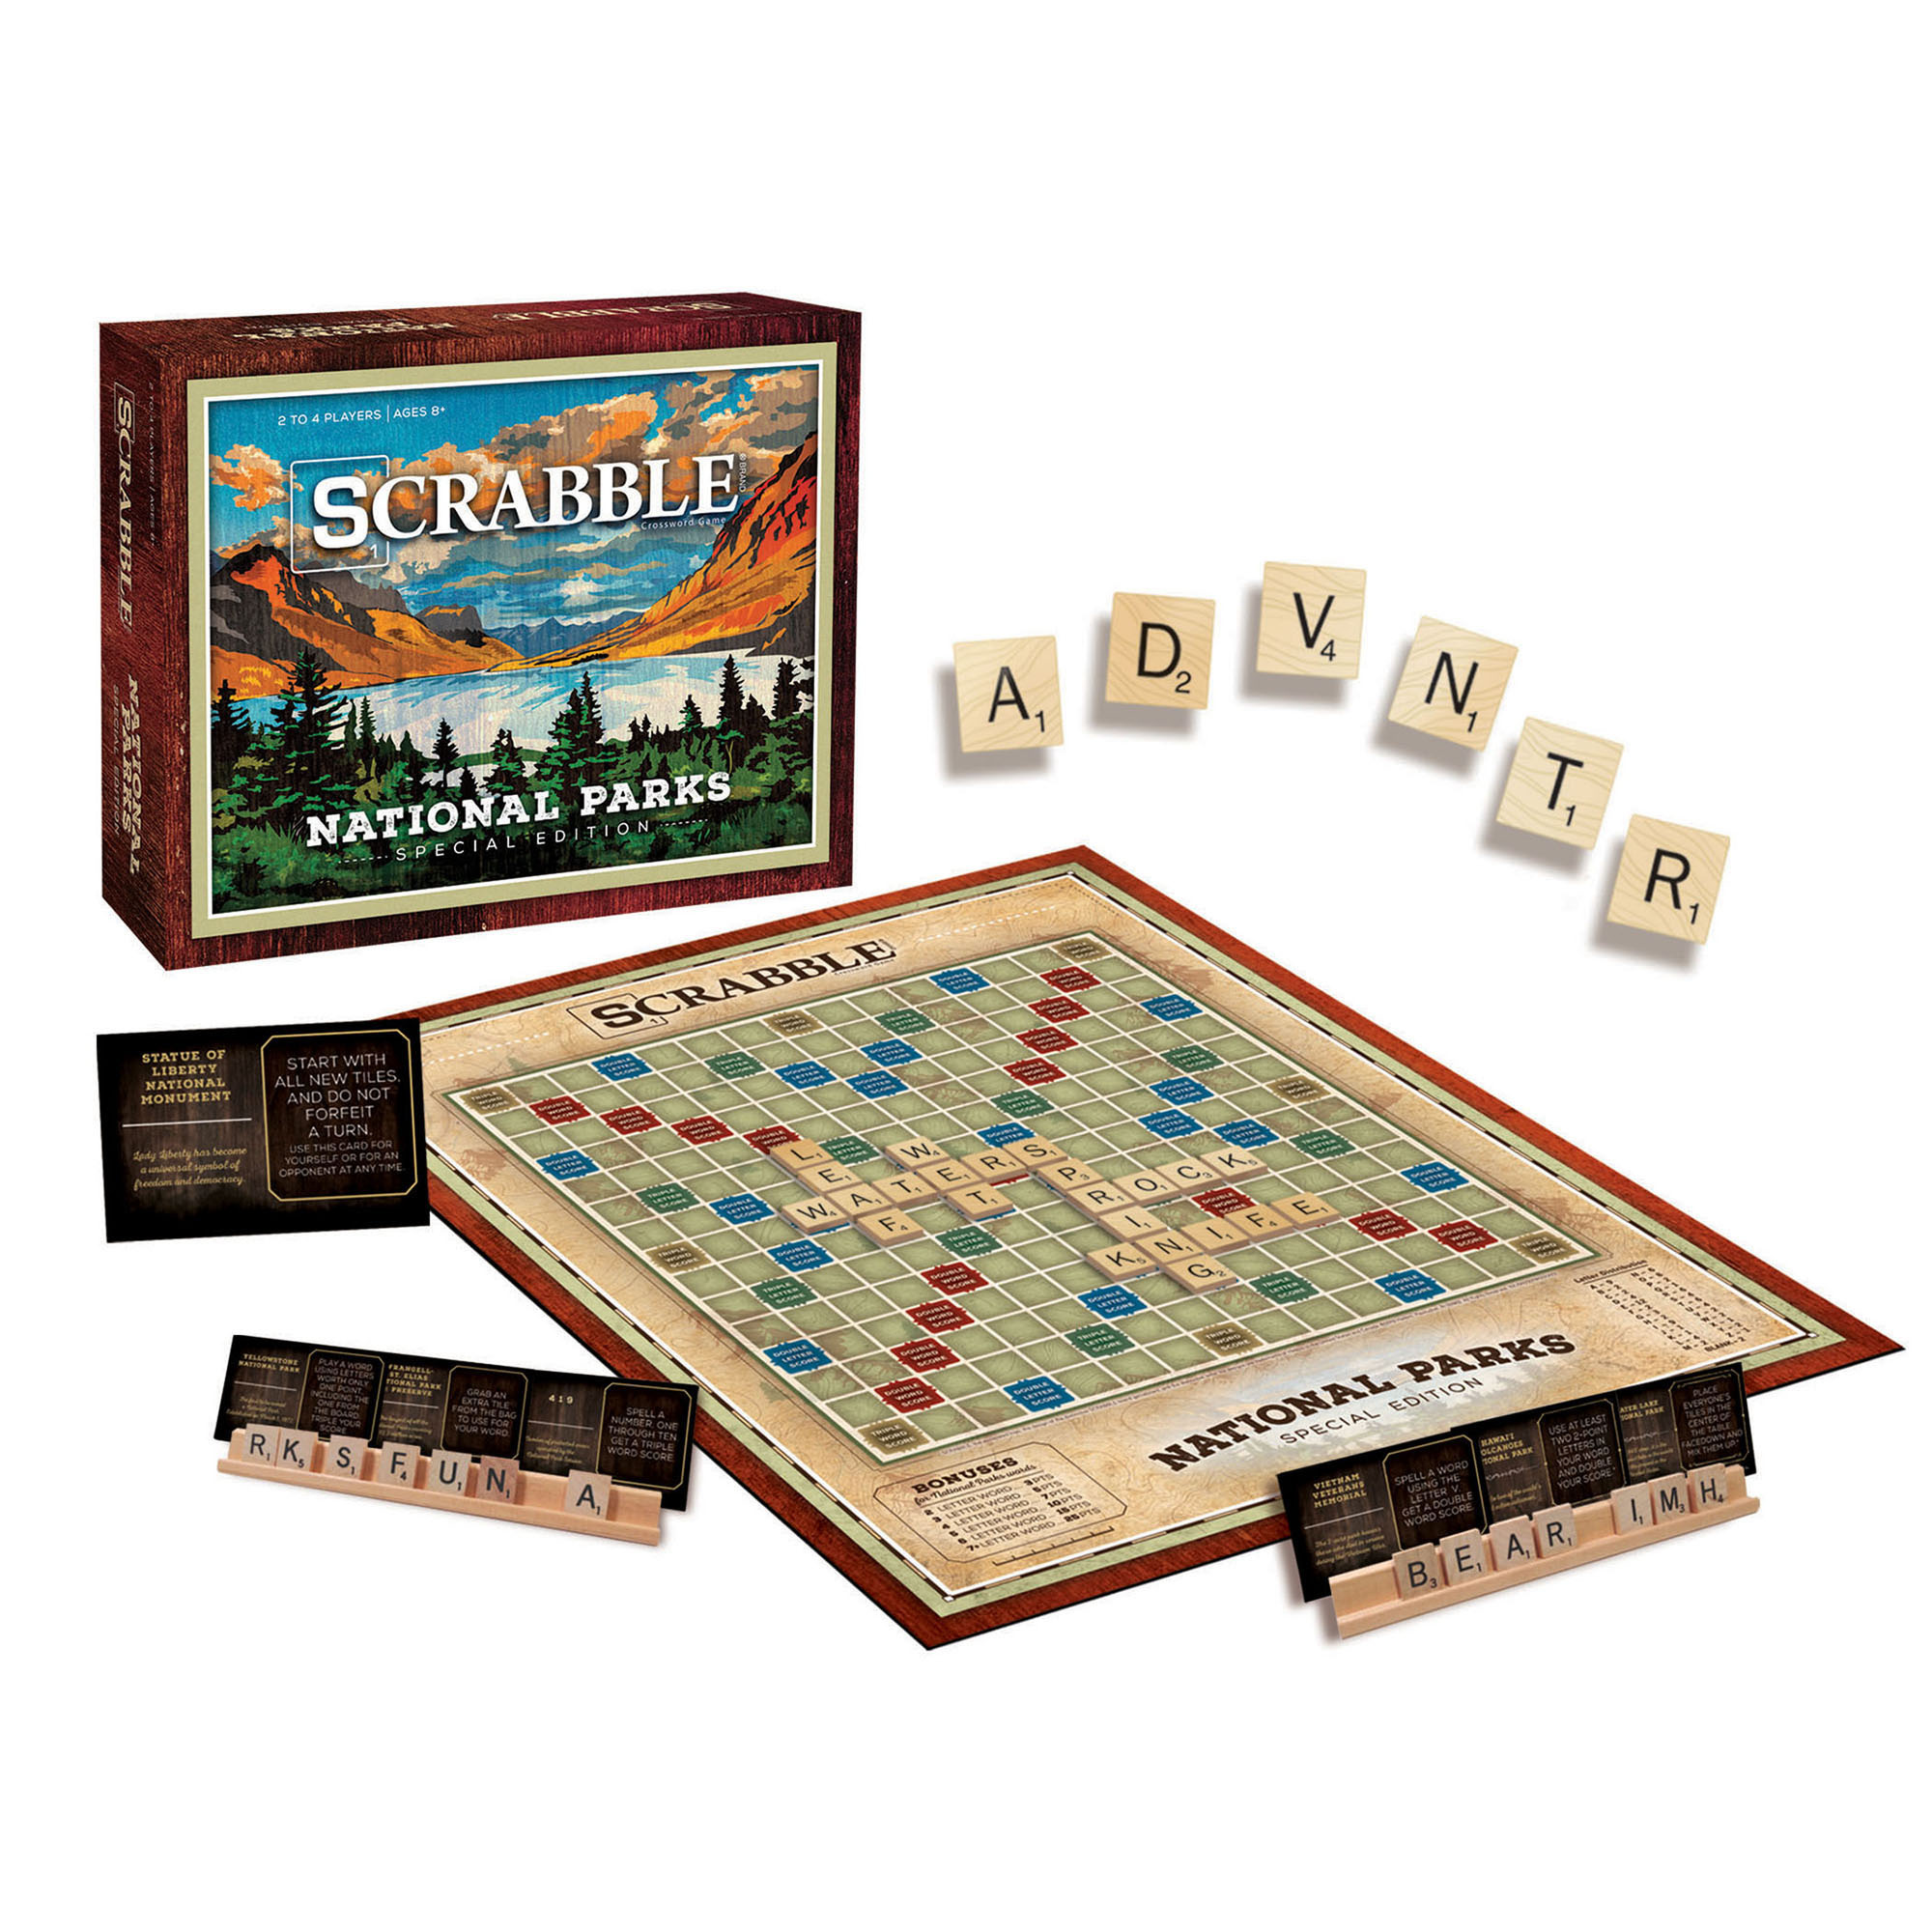 Scrabble: The Board of the National Parks edition, Board gaming during an adventure, Natural bingo. 2000x2000 HD Wallpaper.